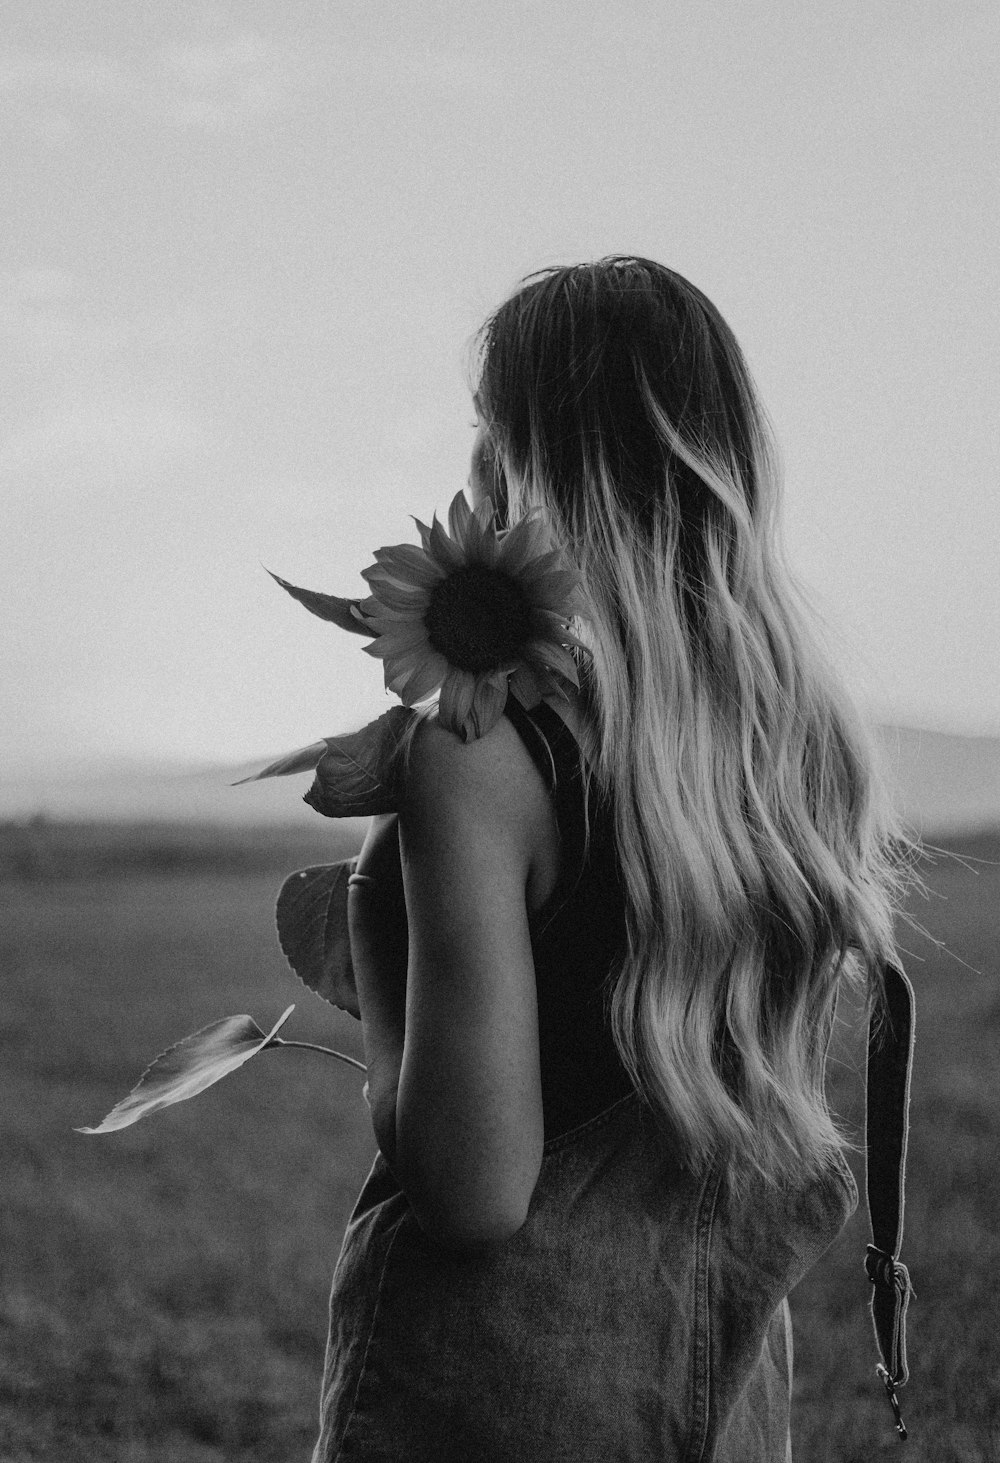 grayscale photo of woman holding sunflower